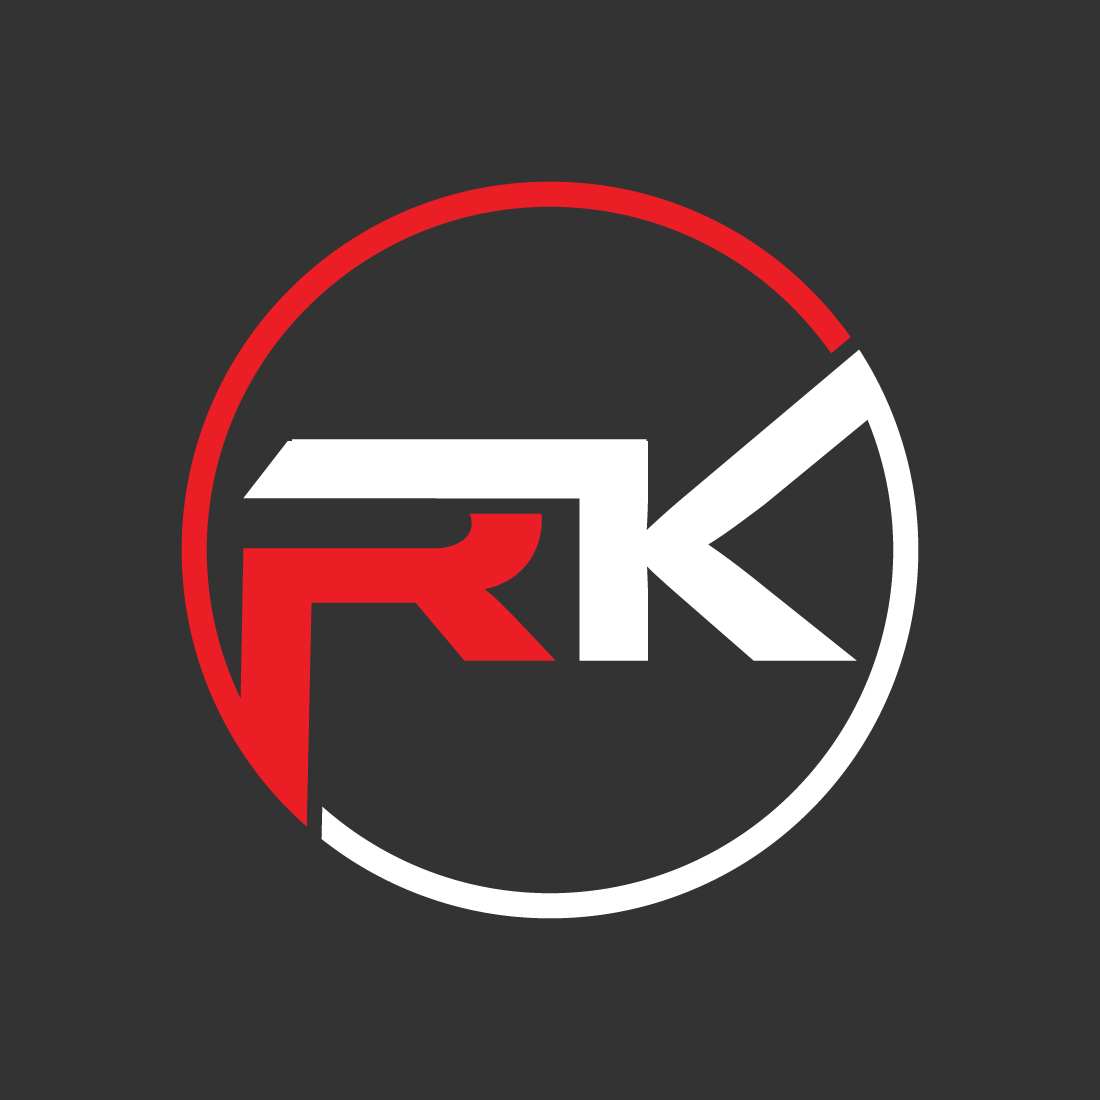 Rk logo new trend | Doodle on photo, Simple background images, Phone  wallpapers vintage